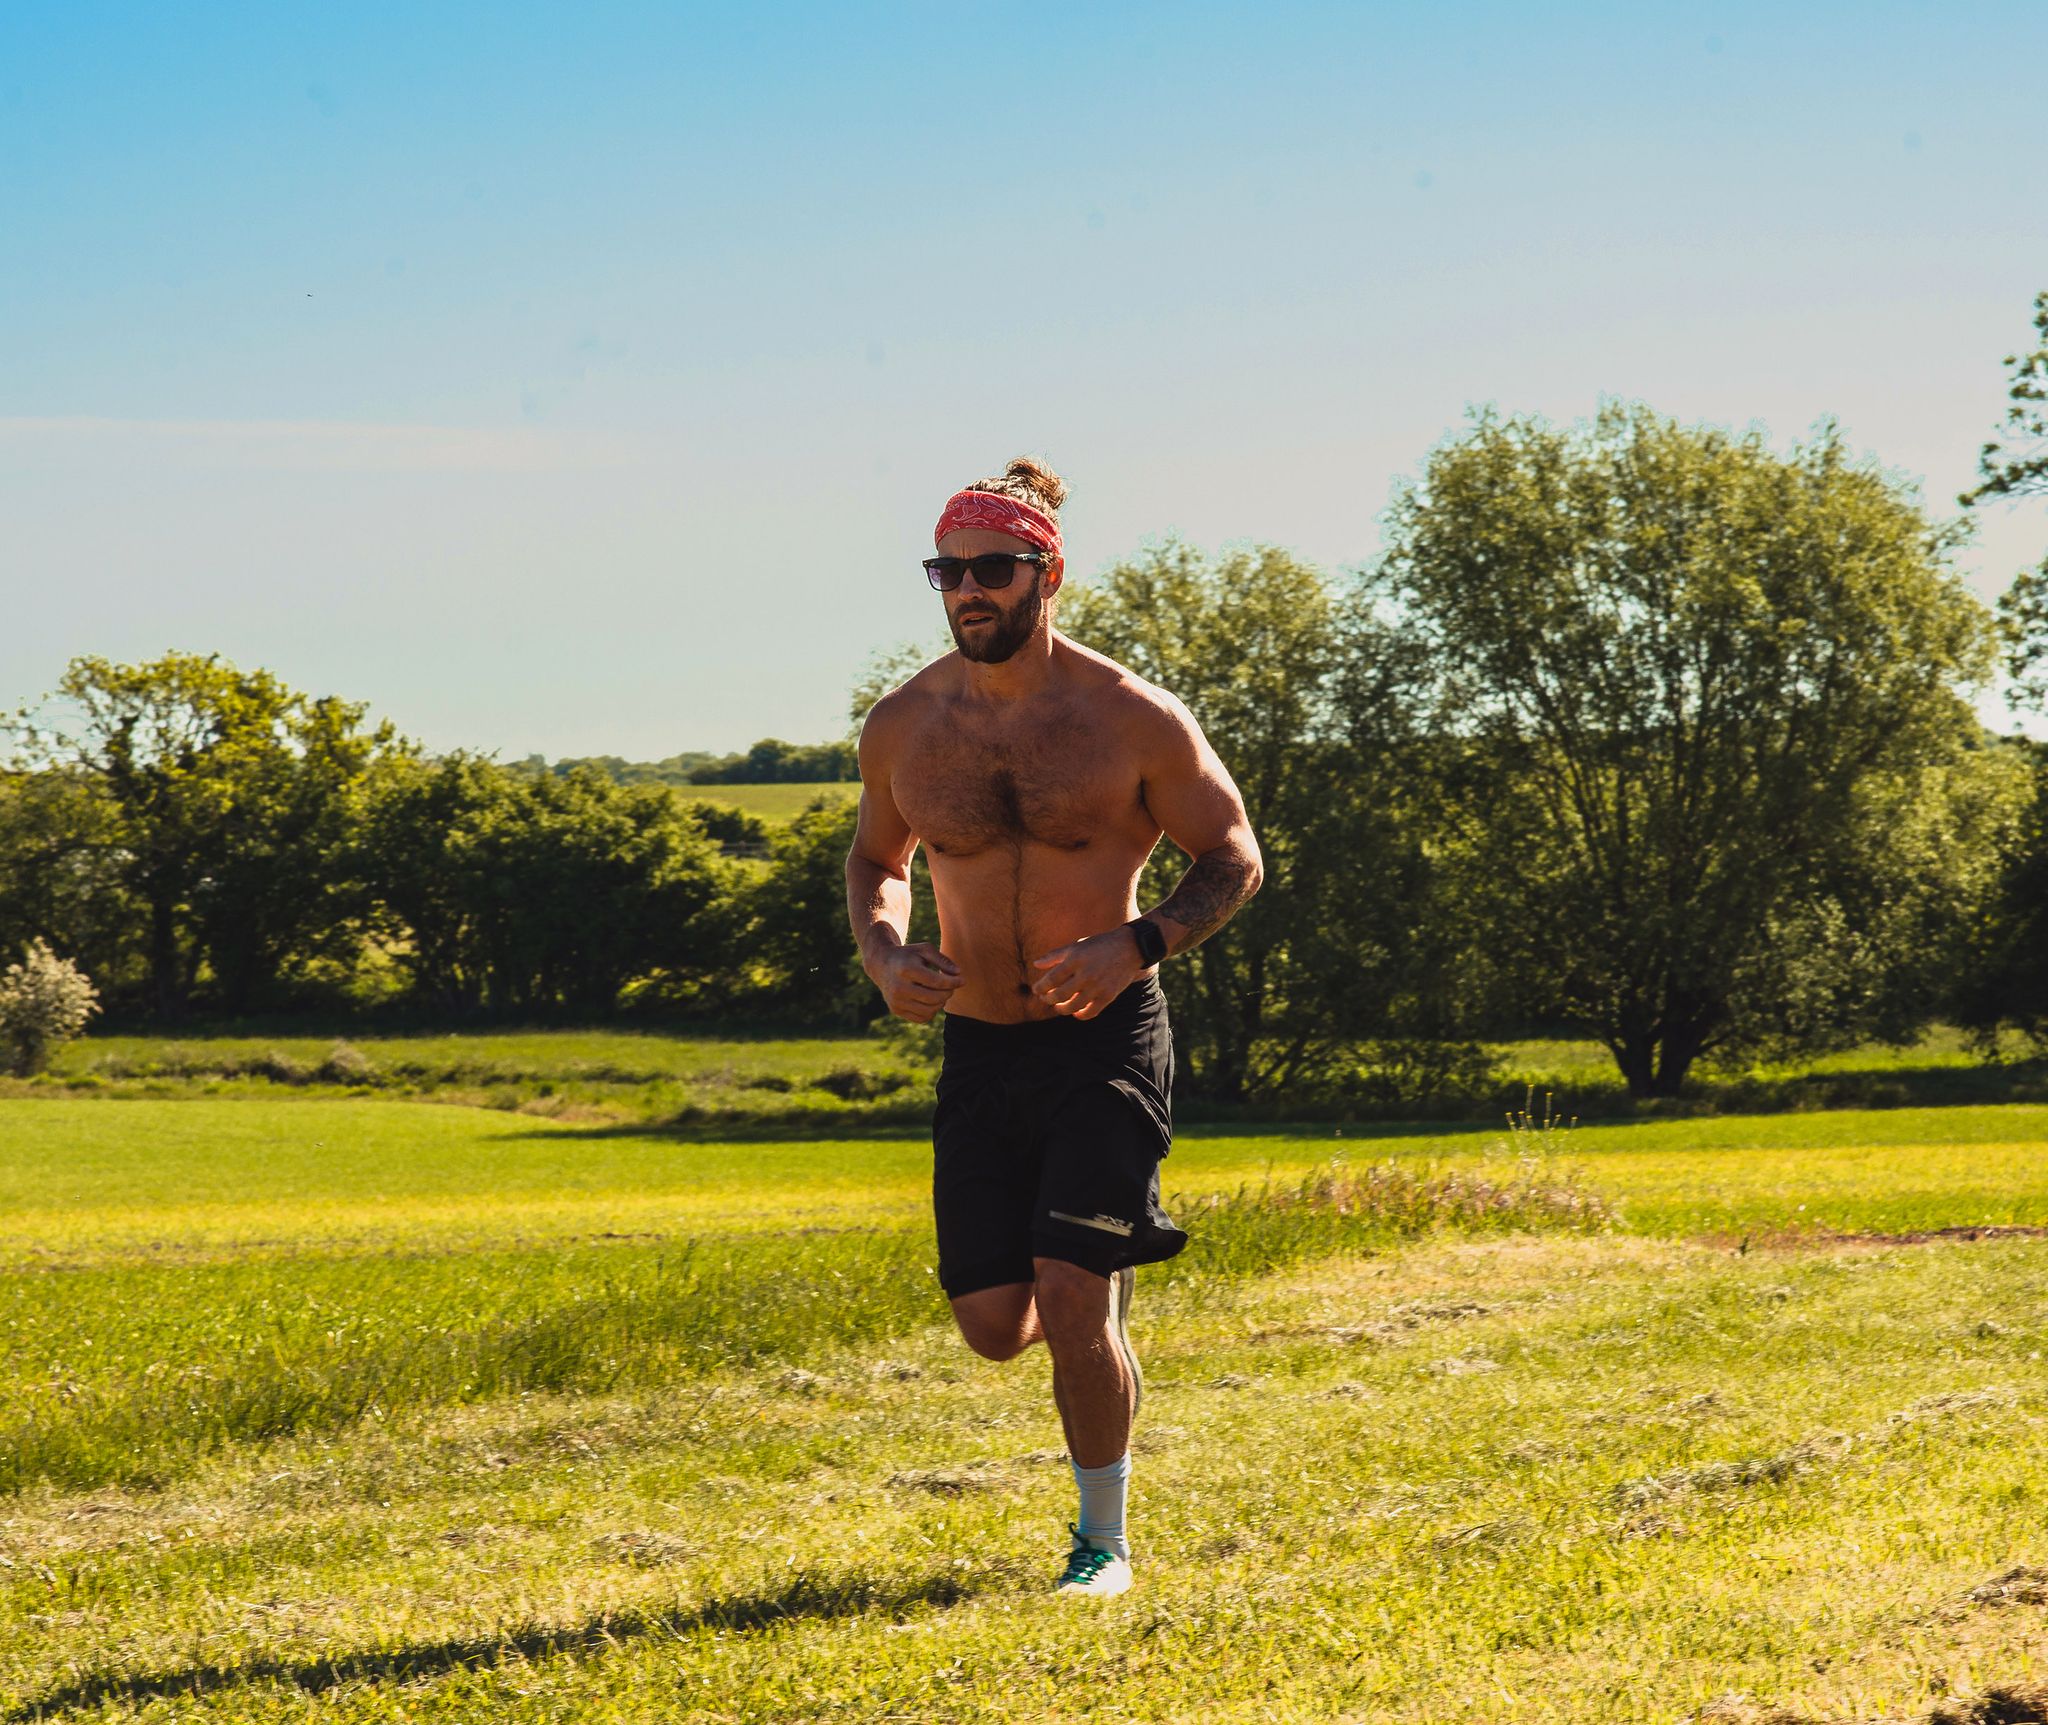 Mammal, People in nature, Shorts, Cap, Active shorts, Plain, Chest, Waist, Muscle, Grassland, 